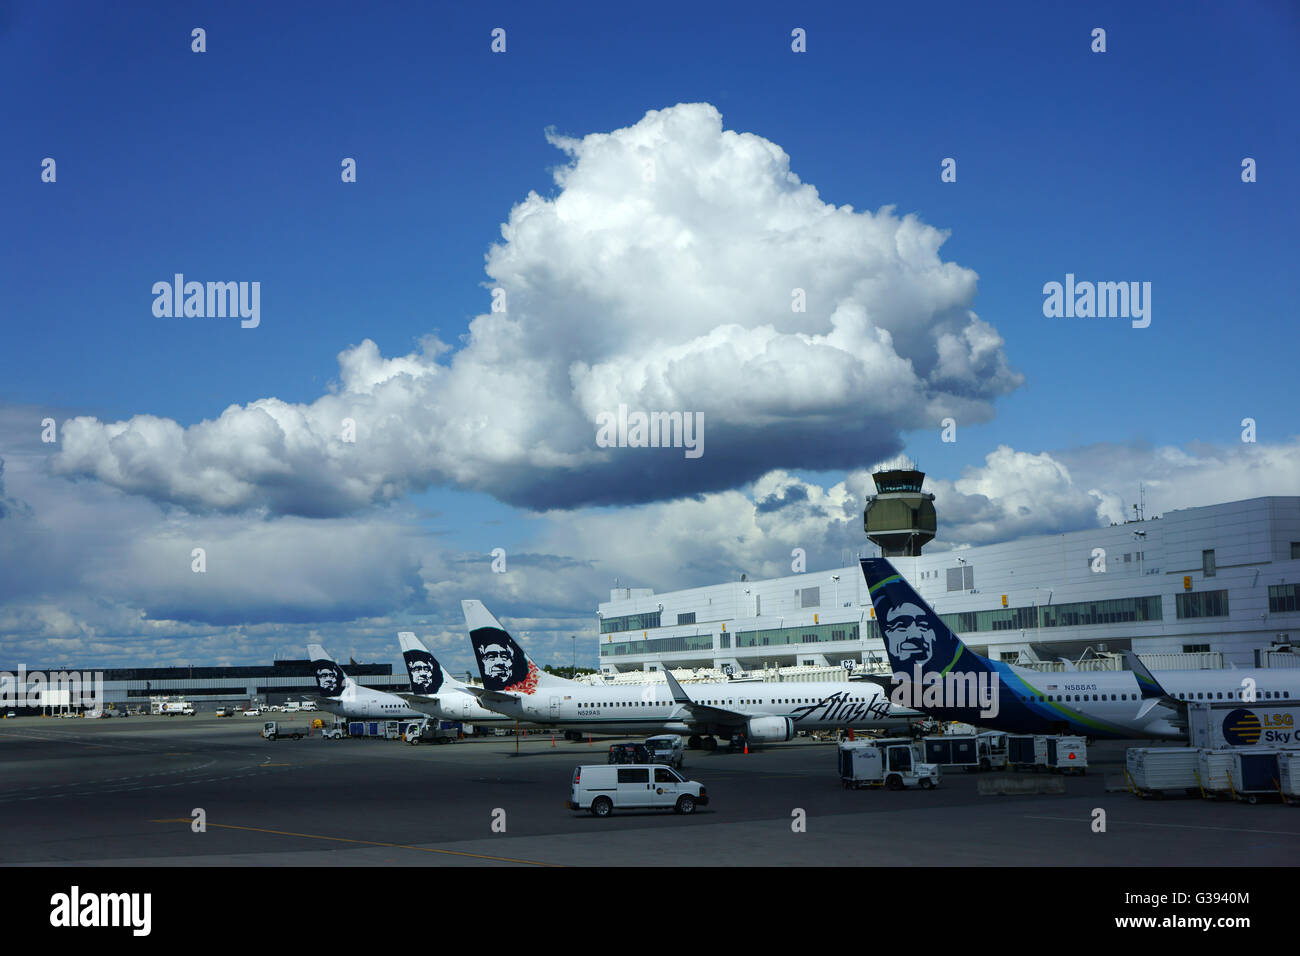 Cumulus cloud over Alaska Airline airplanes at Anchorage Ted Stevens International Airport, Alaska Stock Photo